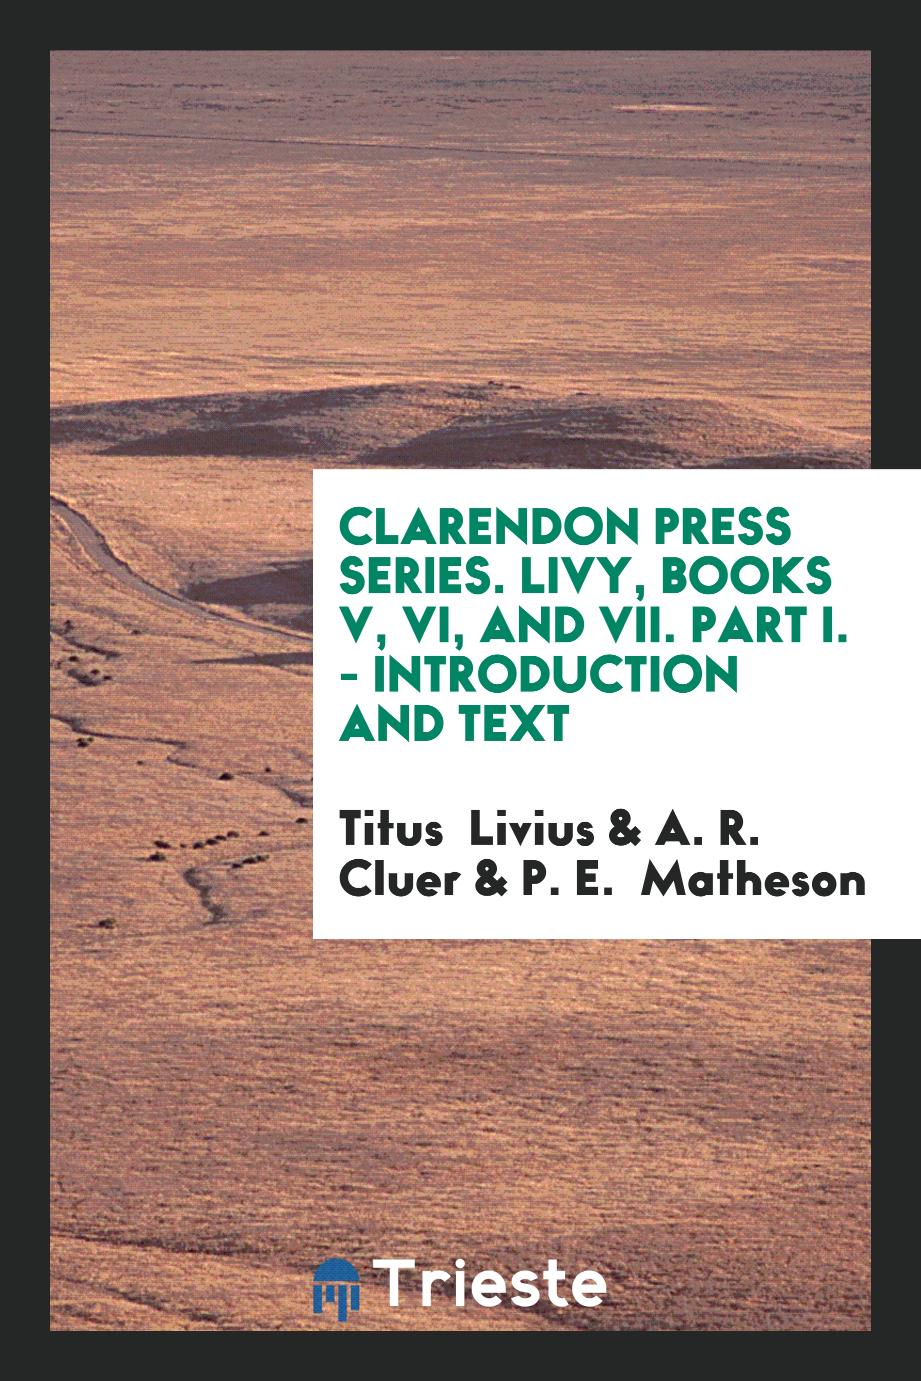 Clarendon Press Series. Livy, Books V, VI, and VII. Part I. - Introduction and Text